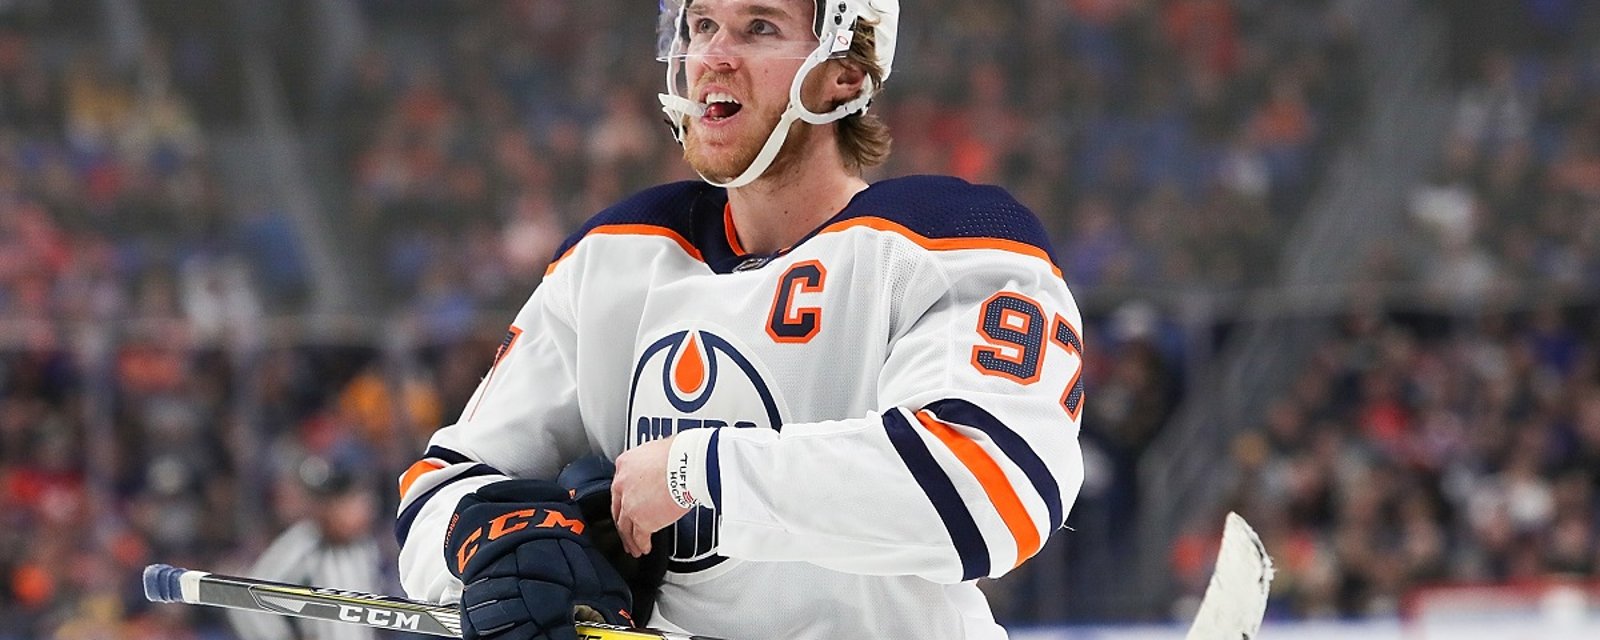 Big update on Connor McDavid from Monday morning practice.